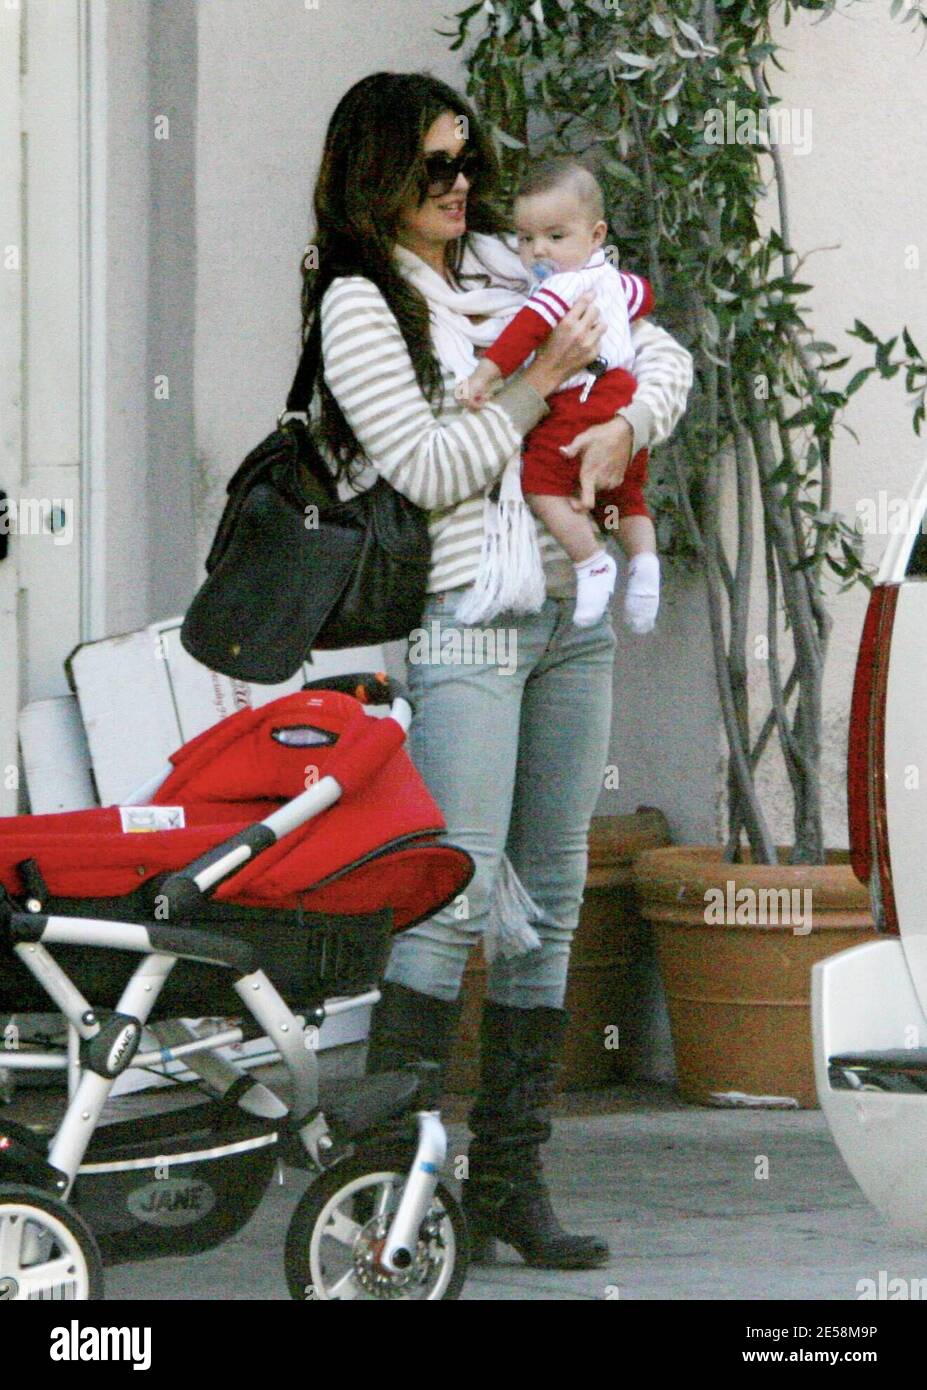 Exclusive!! Actress Paz Vega, husband Orson Salazar and four month old son Orson share a family day out. The proud new parents played with their son over lunch and took lots of photos to capture the moment. Little Orson was full of smiles and giggles. They were joined by an older woman who appeared to be Paz's mother (check). Beverly Hills, Calif. 9/16/07.    [[rac ral]] Stock Photo